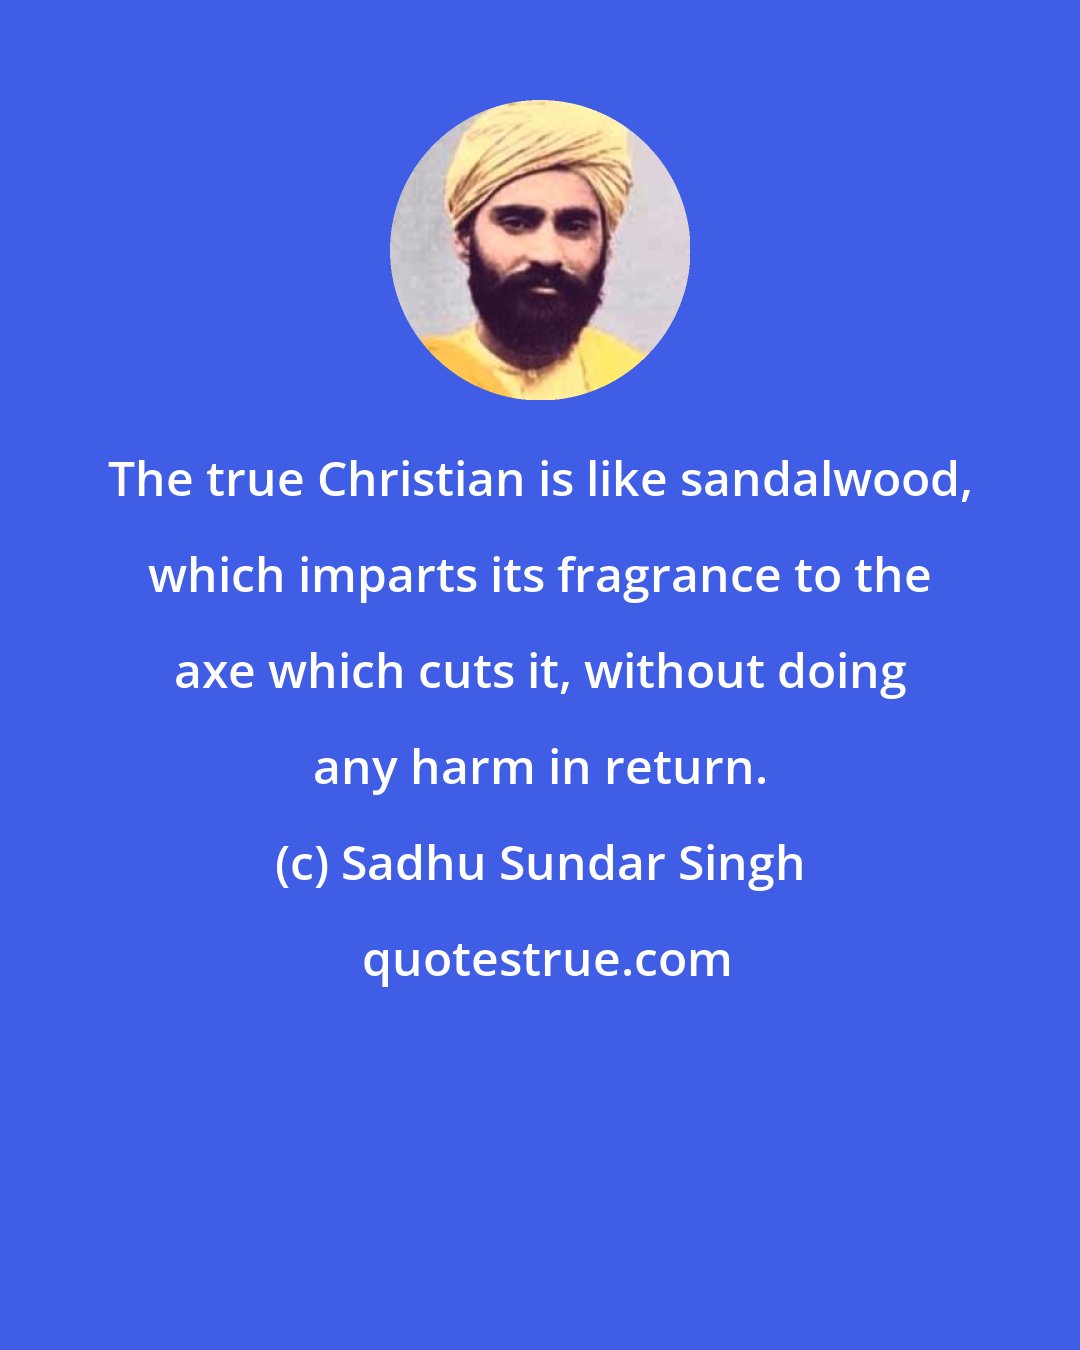 Sadhu Sundar Singh: The true Christian is like sandalwood, which imparts its fragrance to the axe which cuts it, without doing any harm in return.